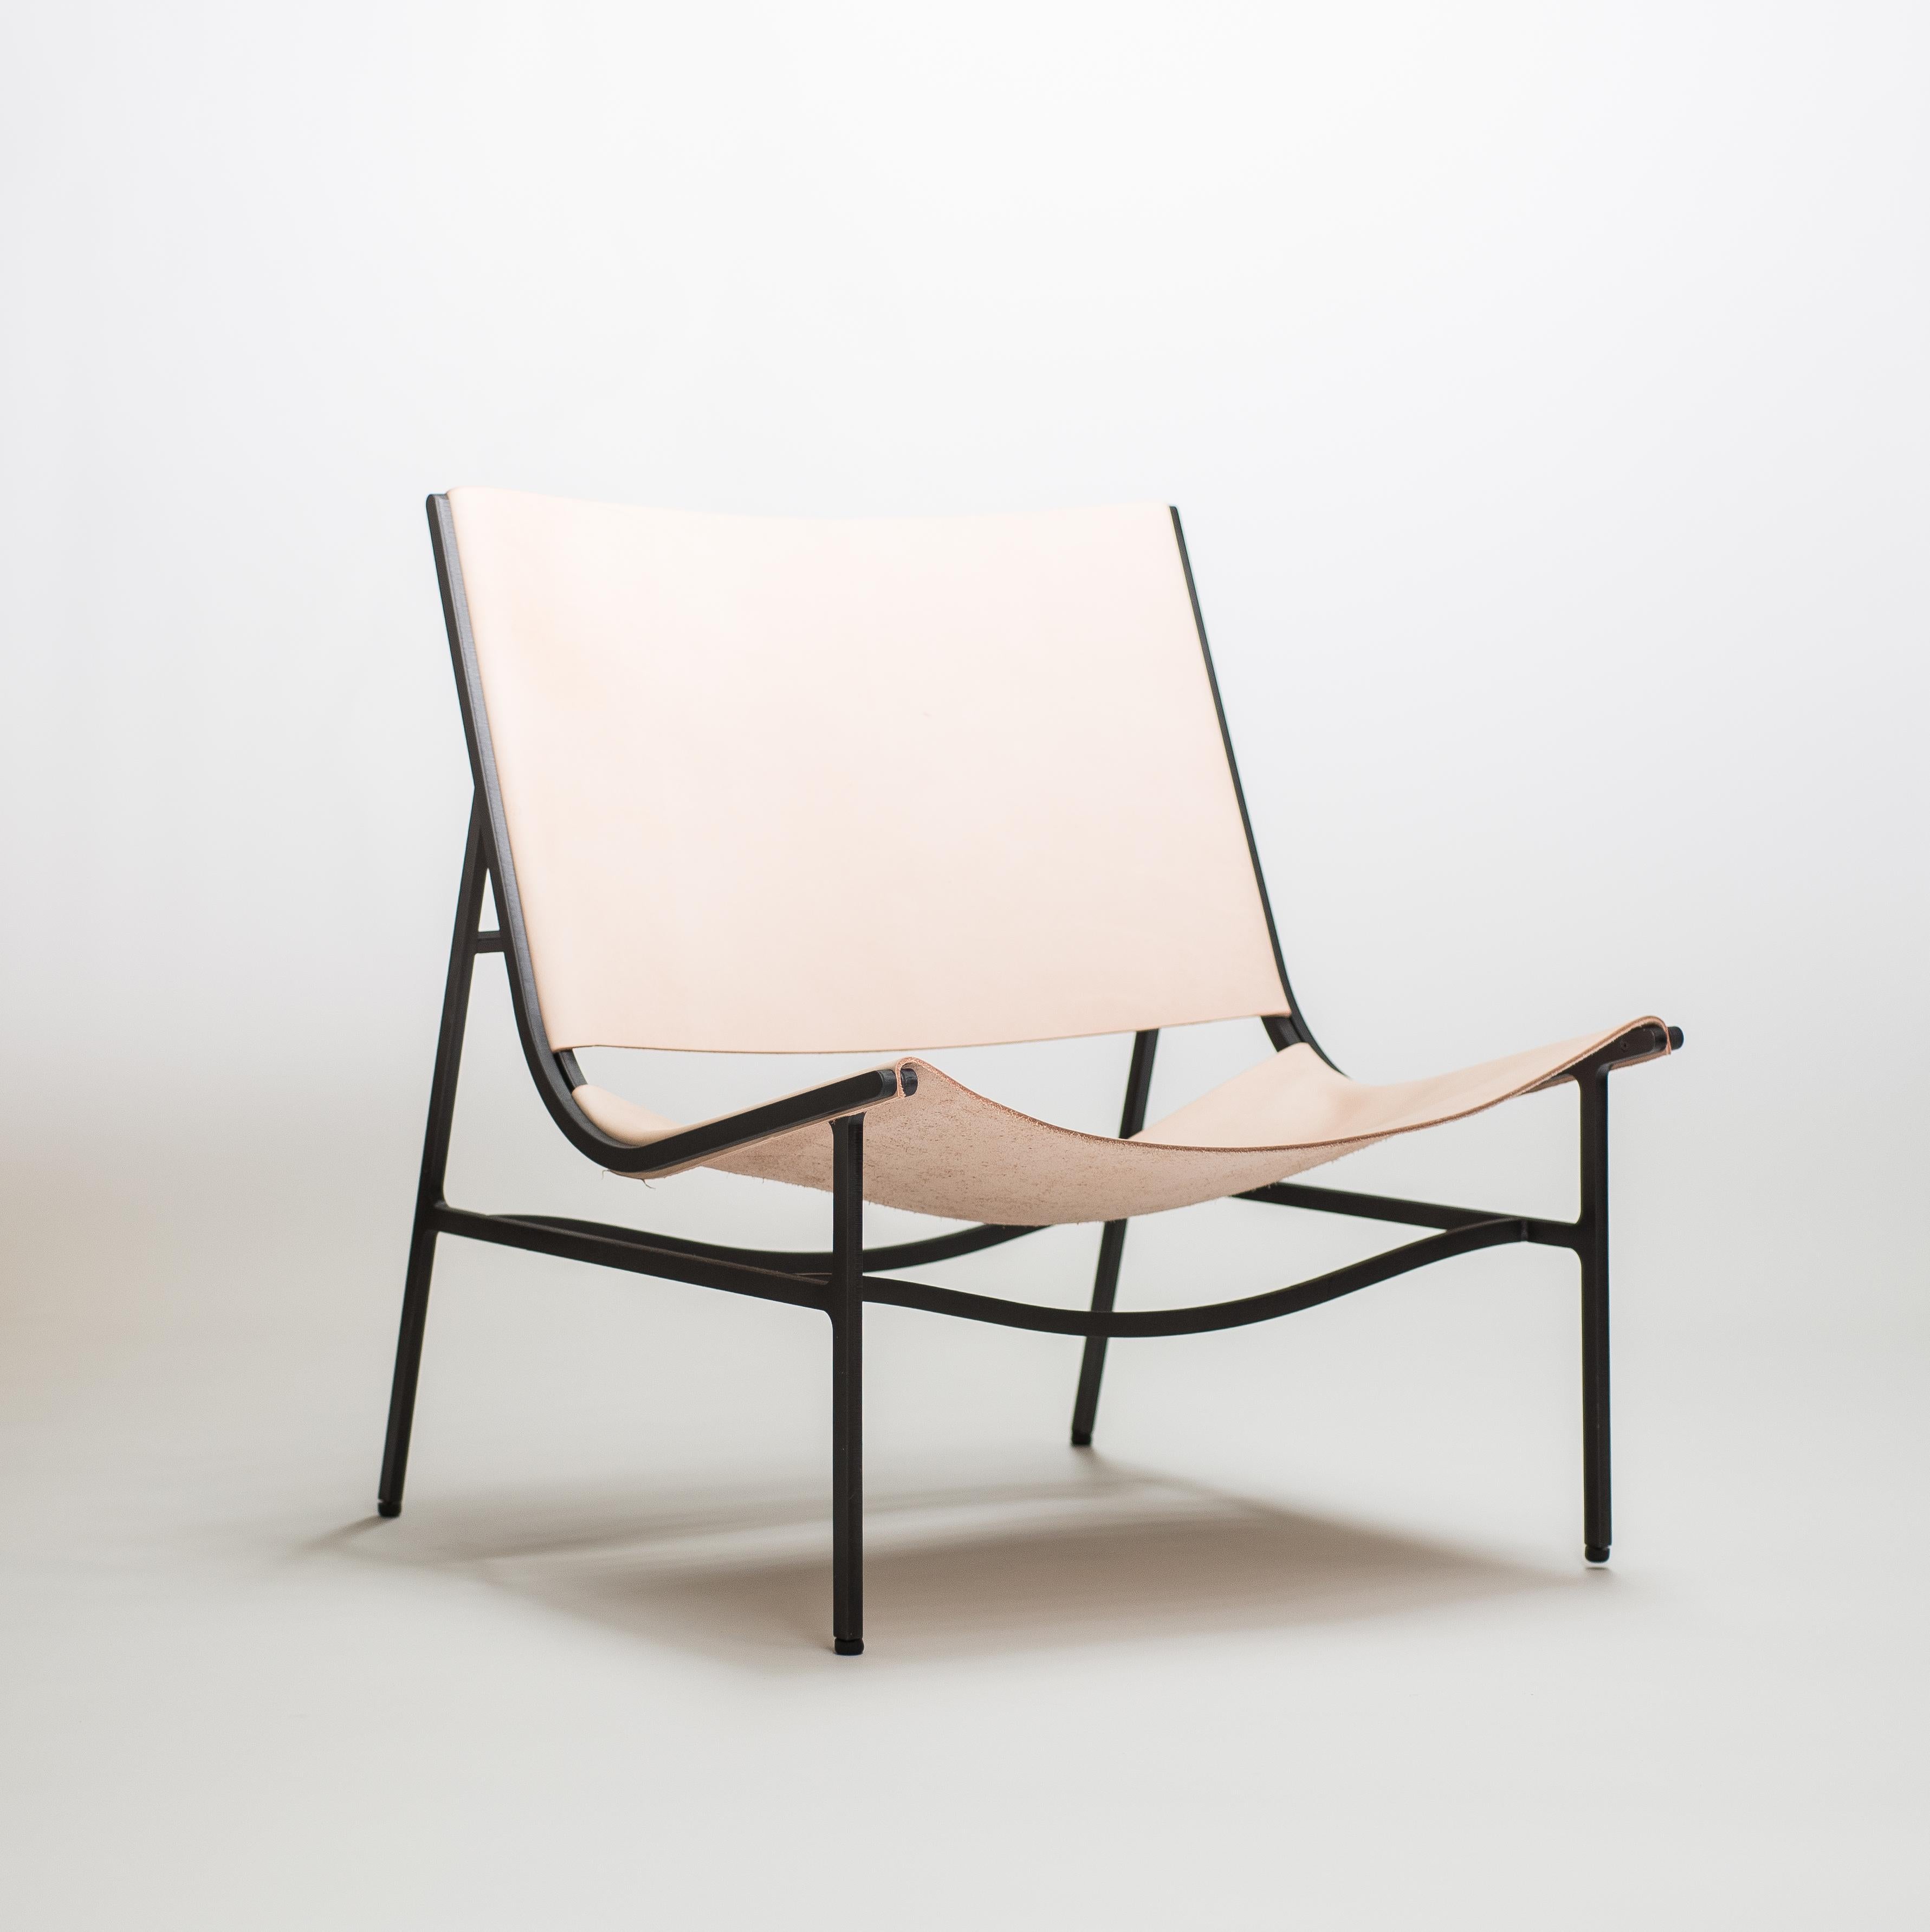 Drawing on the elegant lasercut profile lines, the lounge chair has been vigorously prototyped in search for the most comfortable seat angle to lounge and rest in. Initially placed inside Auburn’s lounge area, the lounge chair GH has been added into